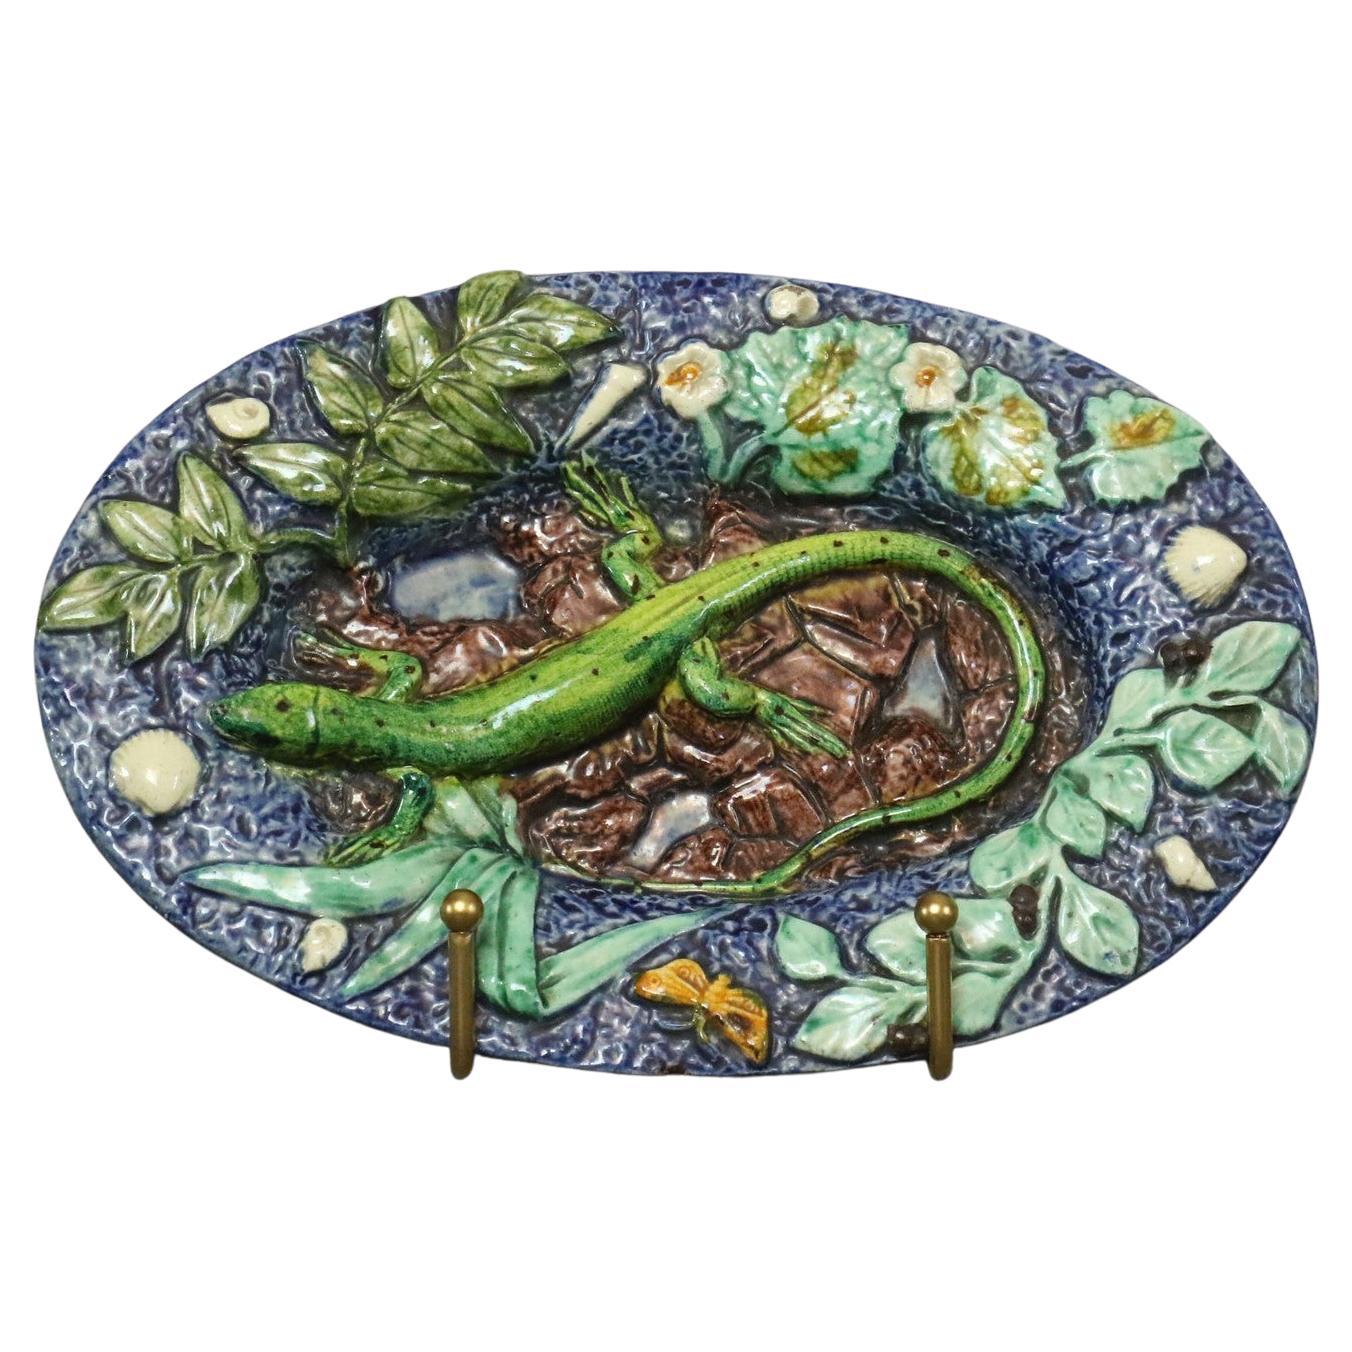 Thomas Sergent French Palissy Ware circa 1880 Lizard trompe l'oeil

It is a very beautiful object in majolica representing a lizard in trompe l'oeil on a decor nature-inspired.

This ceramic is characteristic of the work of the period and Thomas